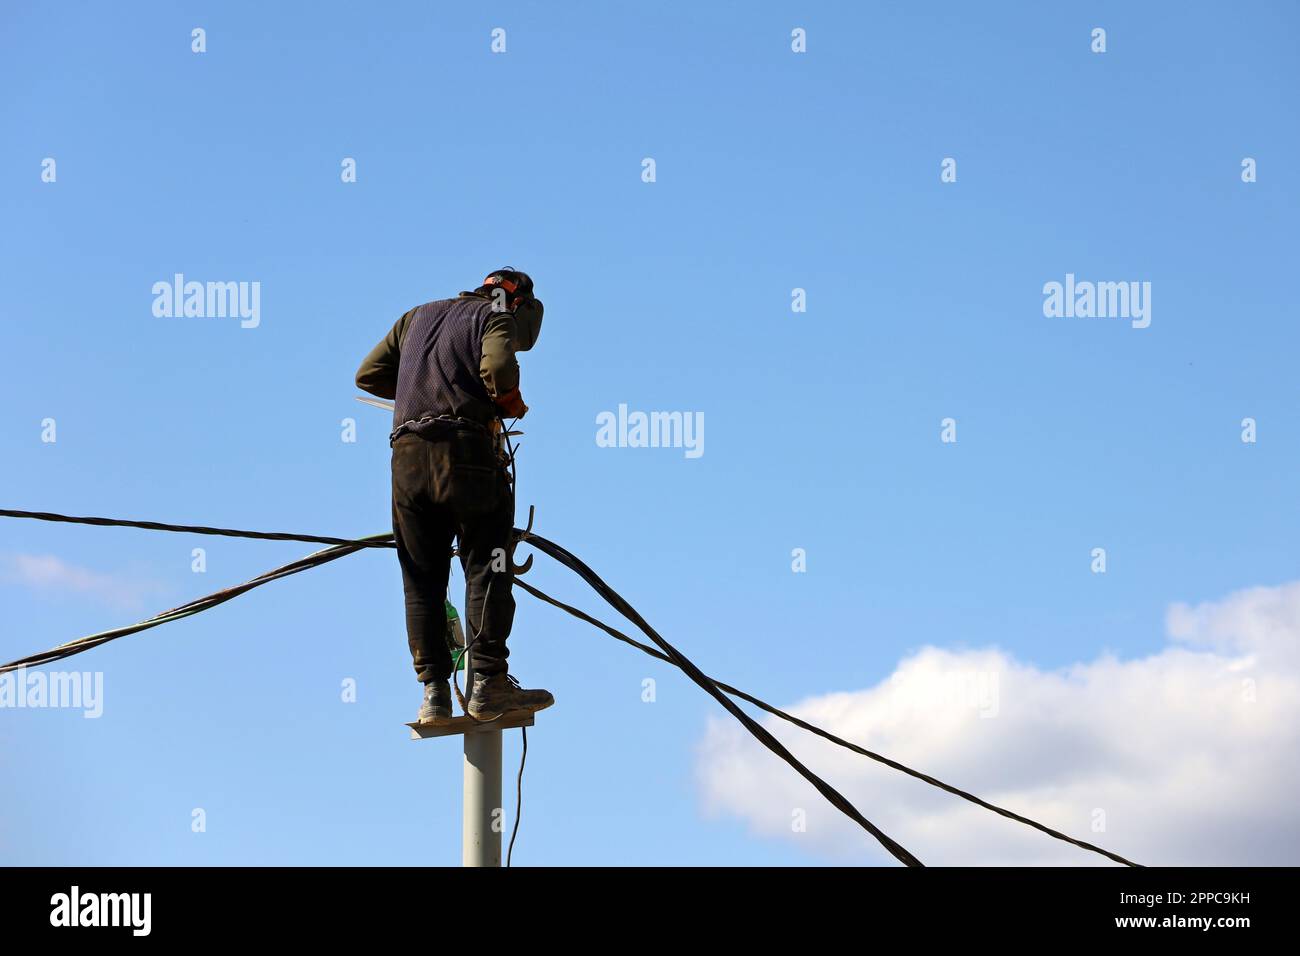 Electrician repairs the electrical wires on a street pole. Worker against the blue sky, concept of street lighting repair, power outages Stock Photo